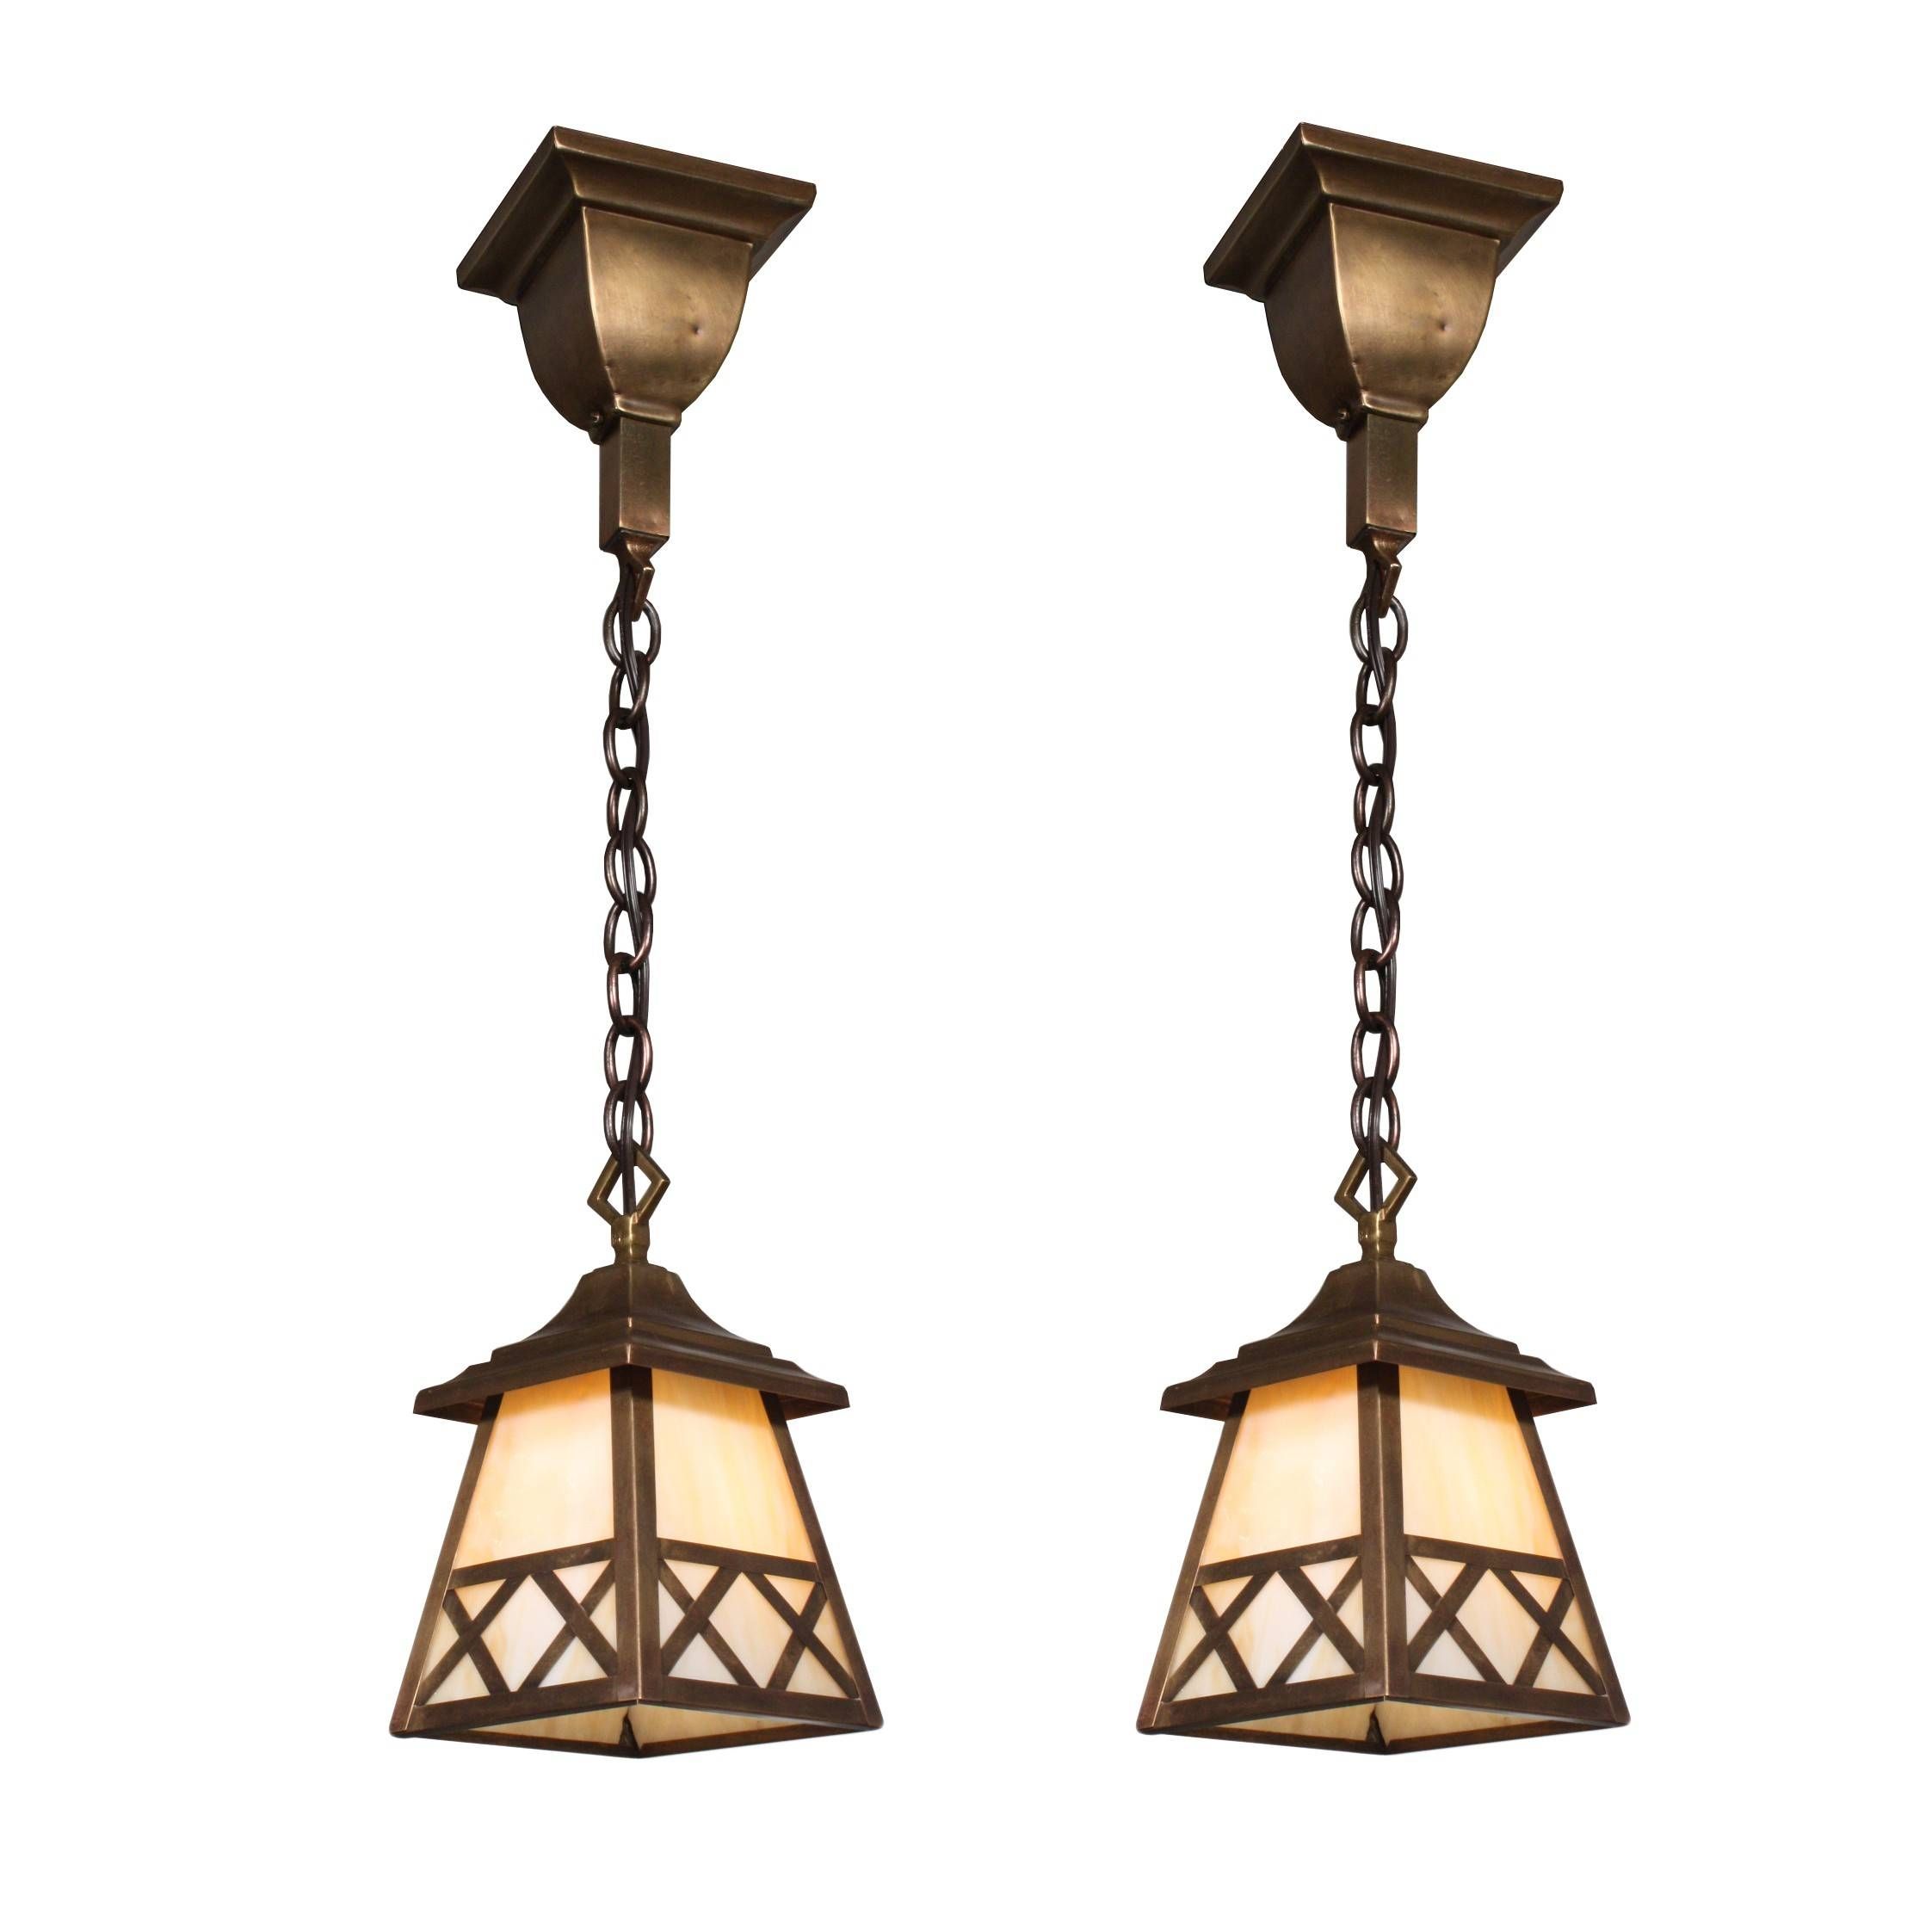 Charming Antique Arts & Crafts Lantern Pendant Lights, Original Throughout Arts And Crafts Pendant Lights (View 3 of 15)